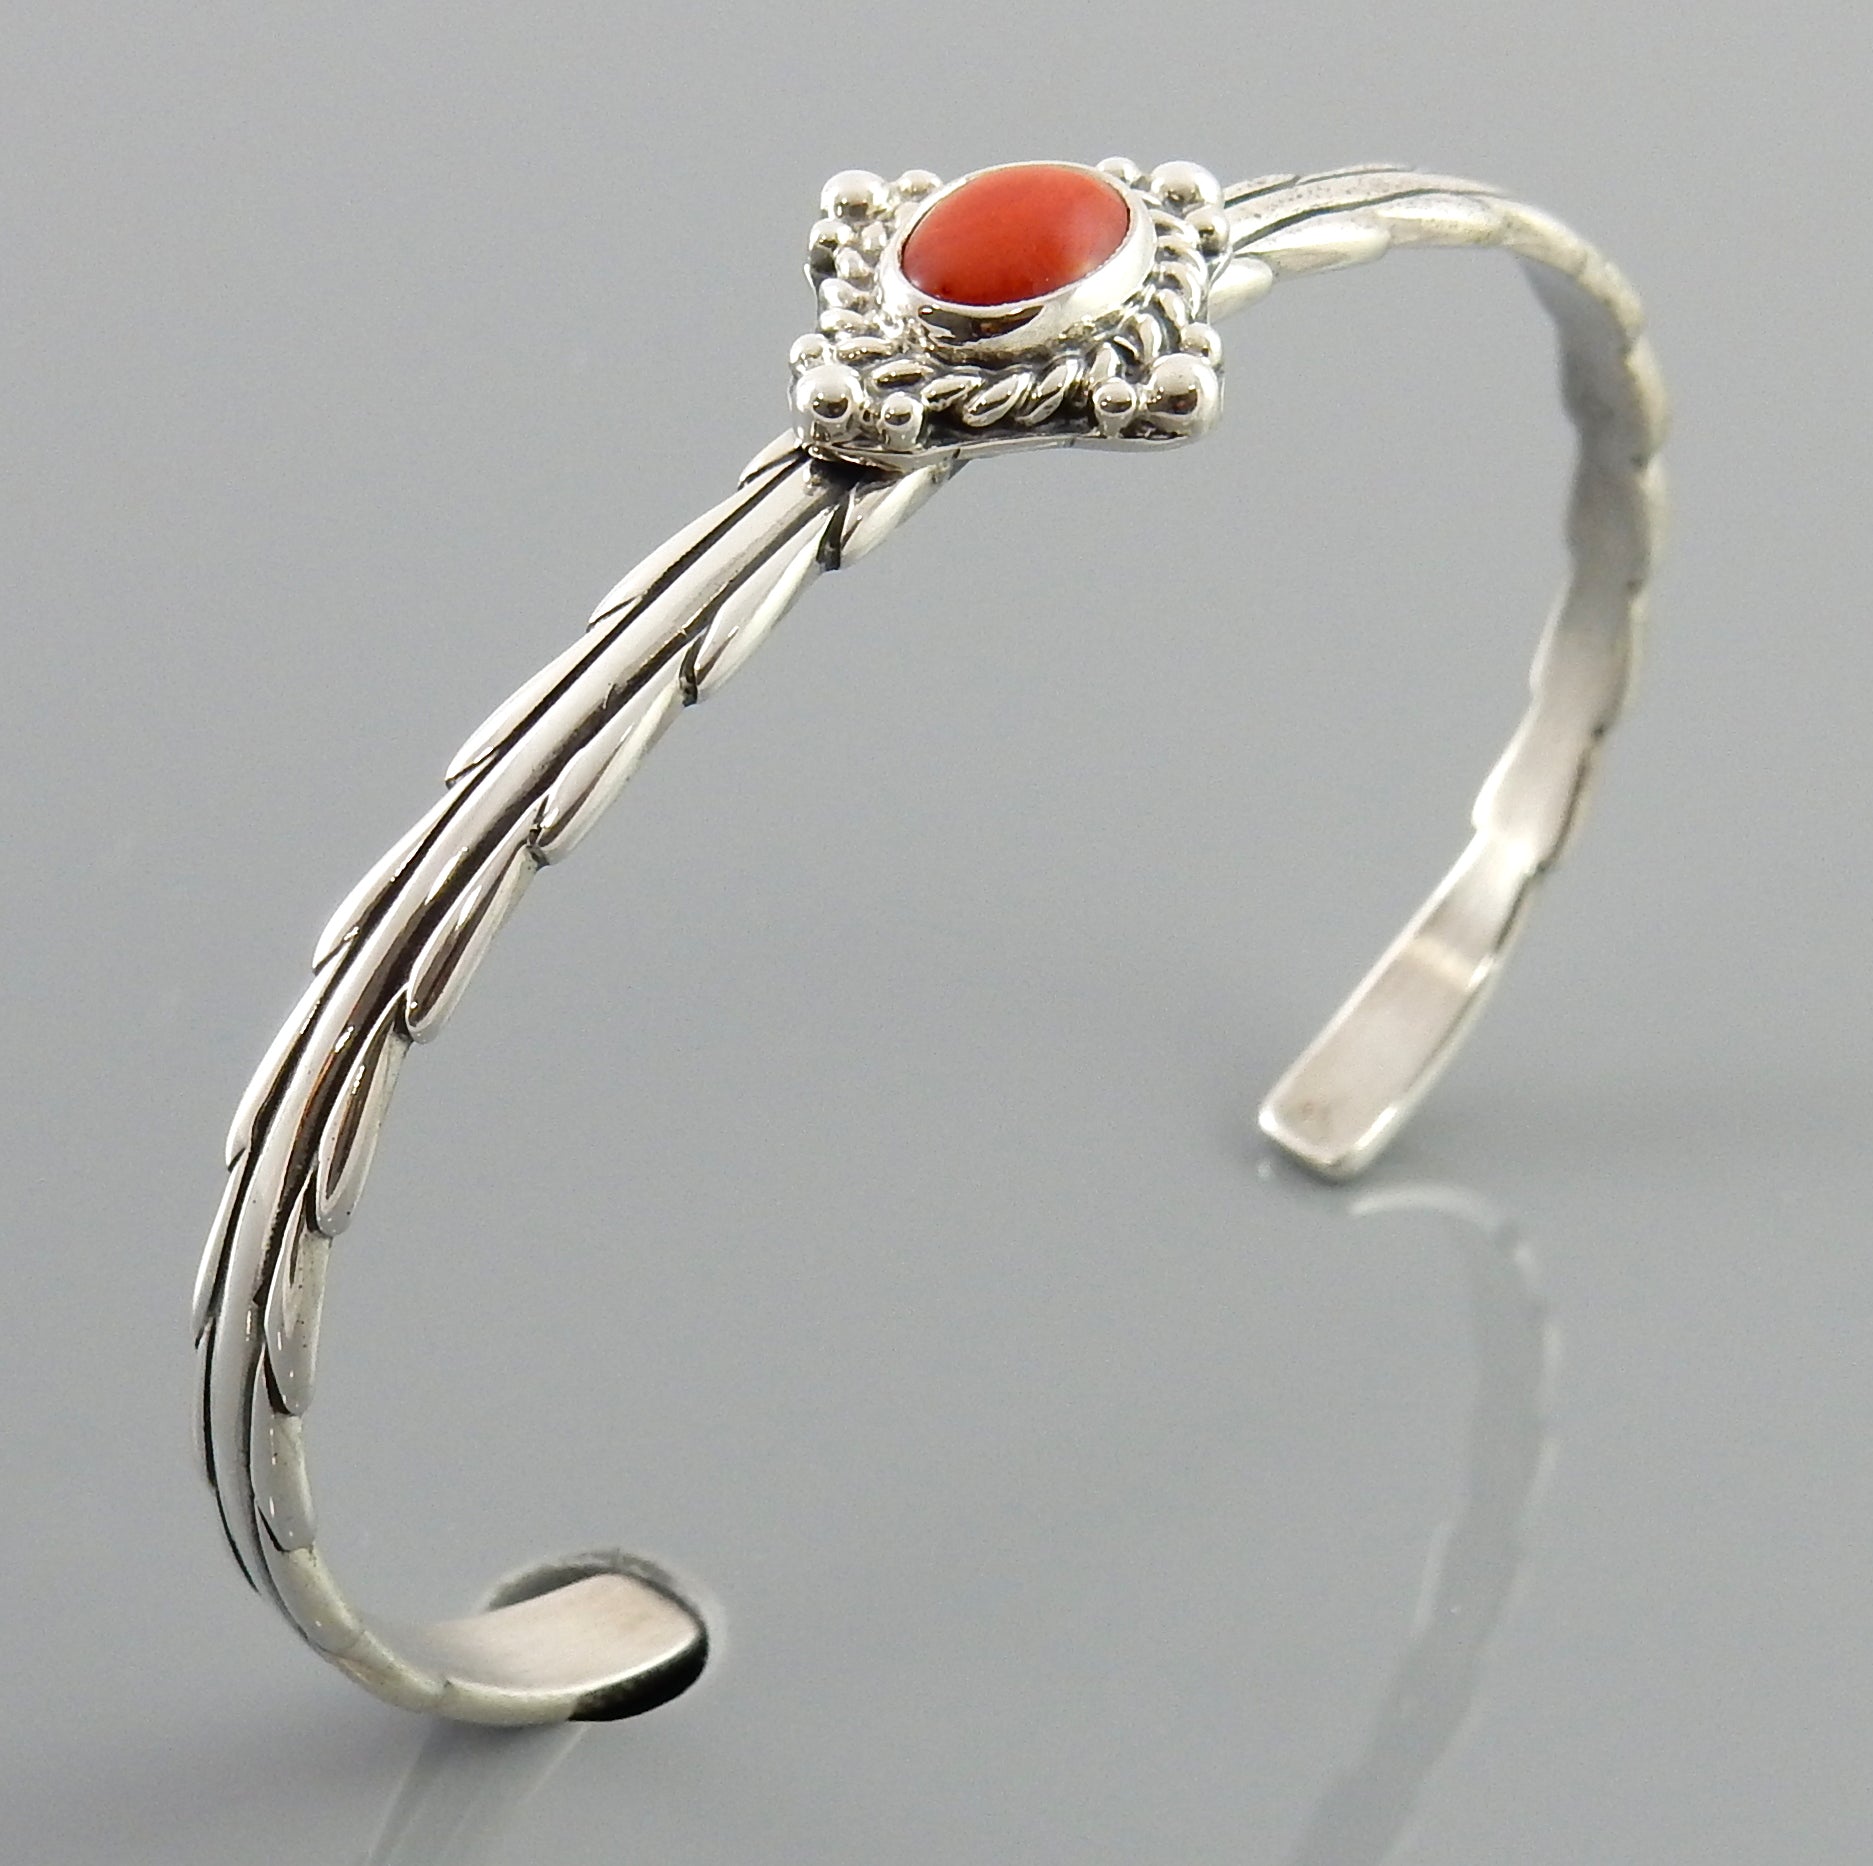 Natural Italian Red Coral Sterling Silver Cuff Bracelet